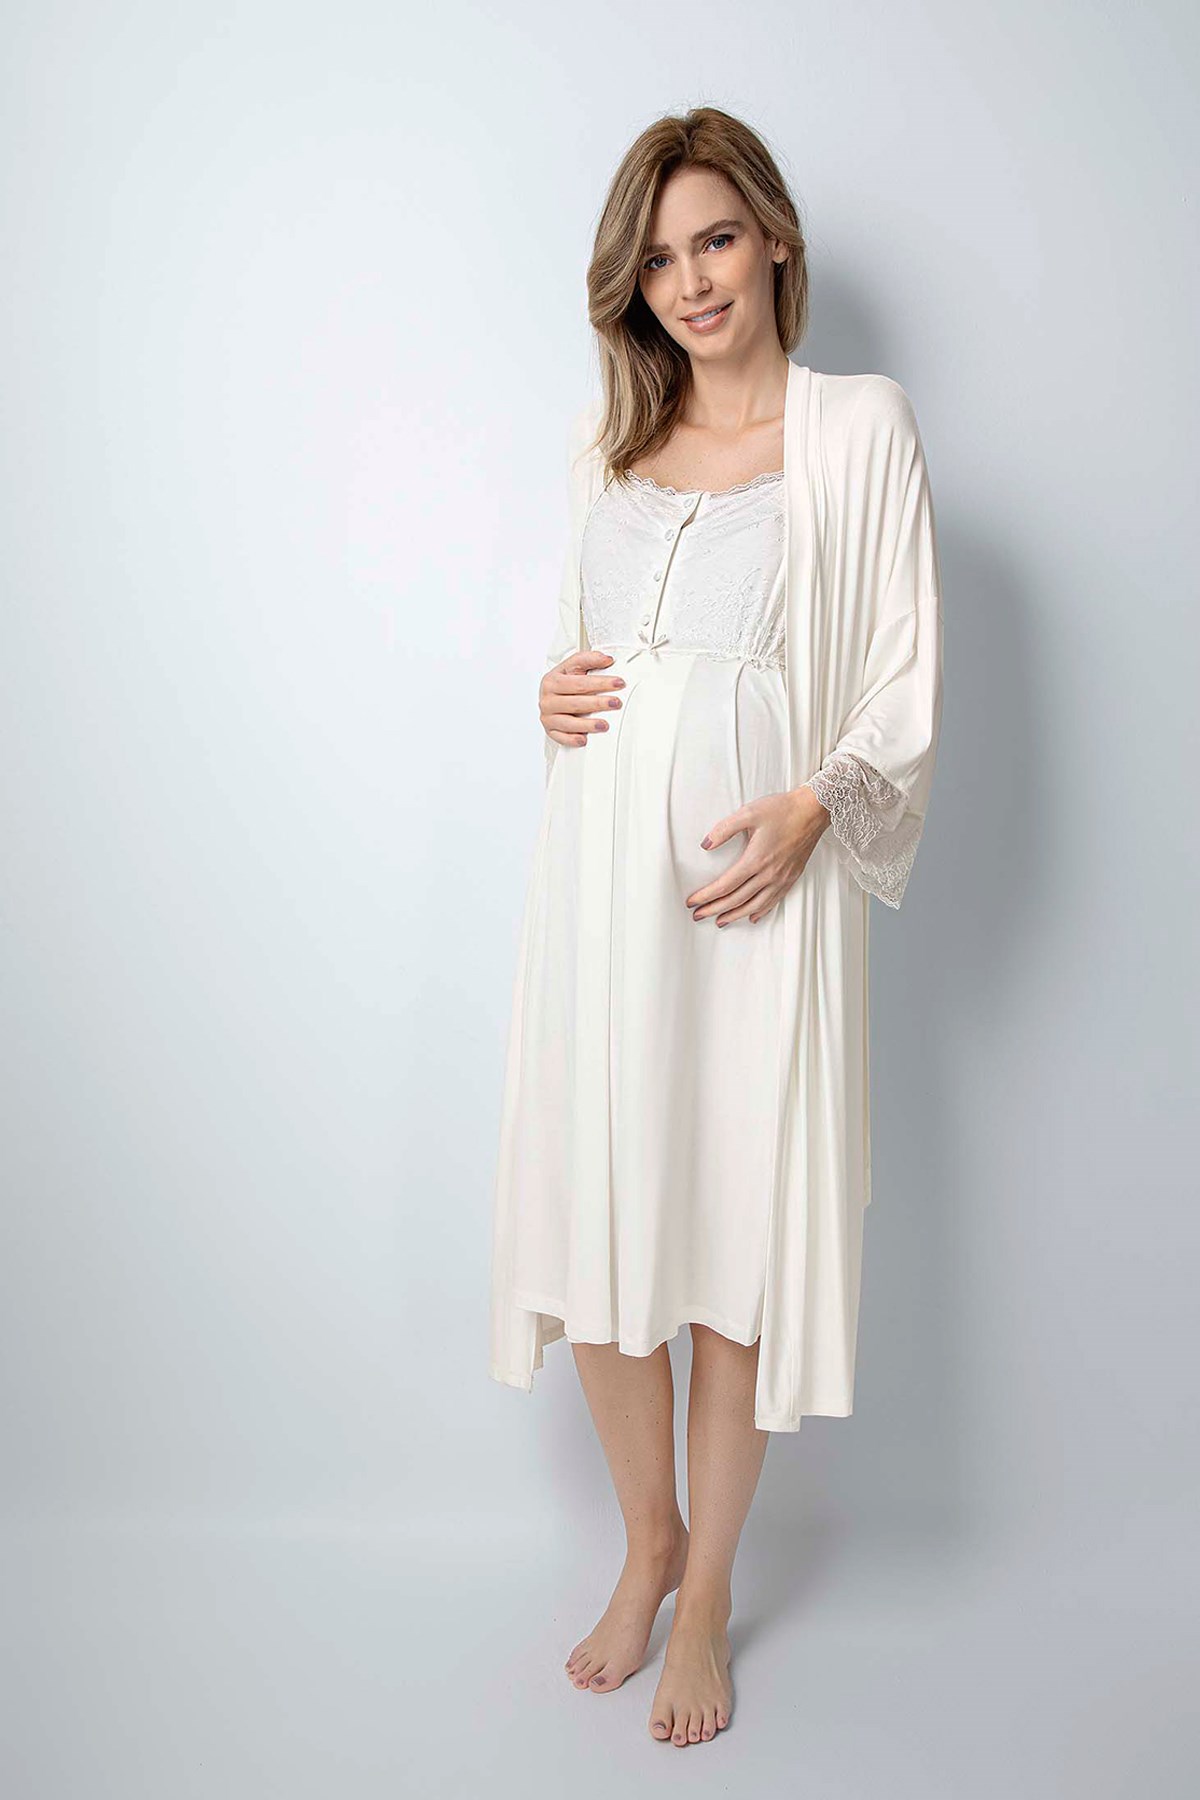 Monamise 18202 Maternity Nightgown with Robe Set for Hospital and Home